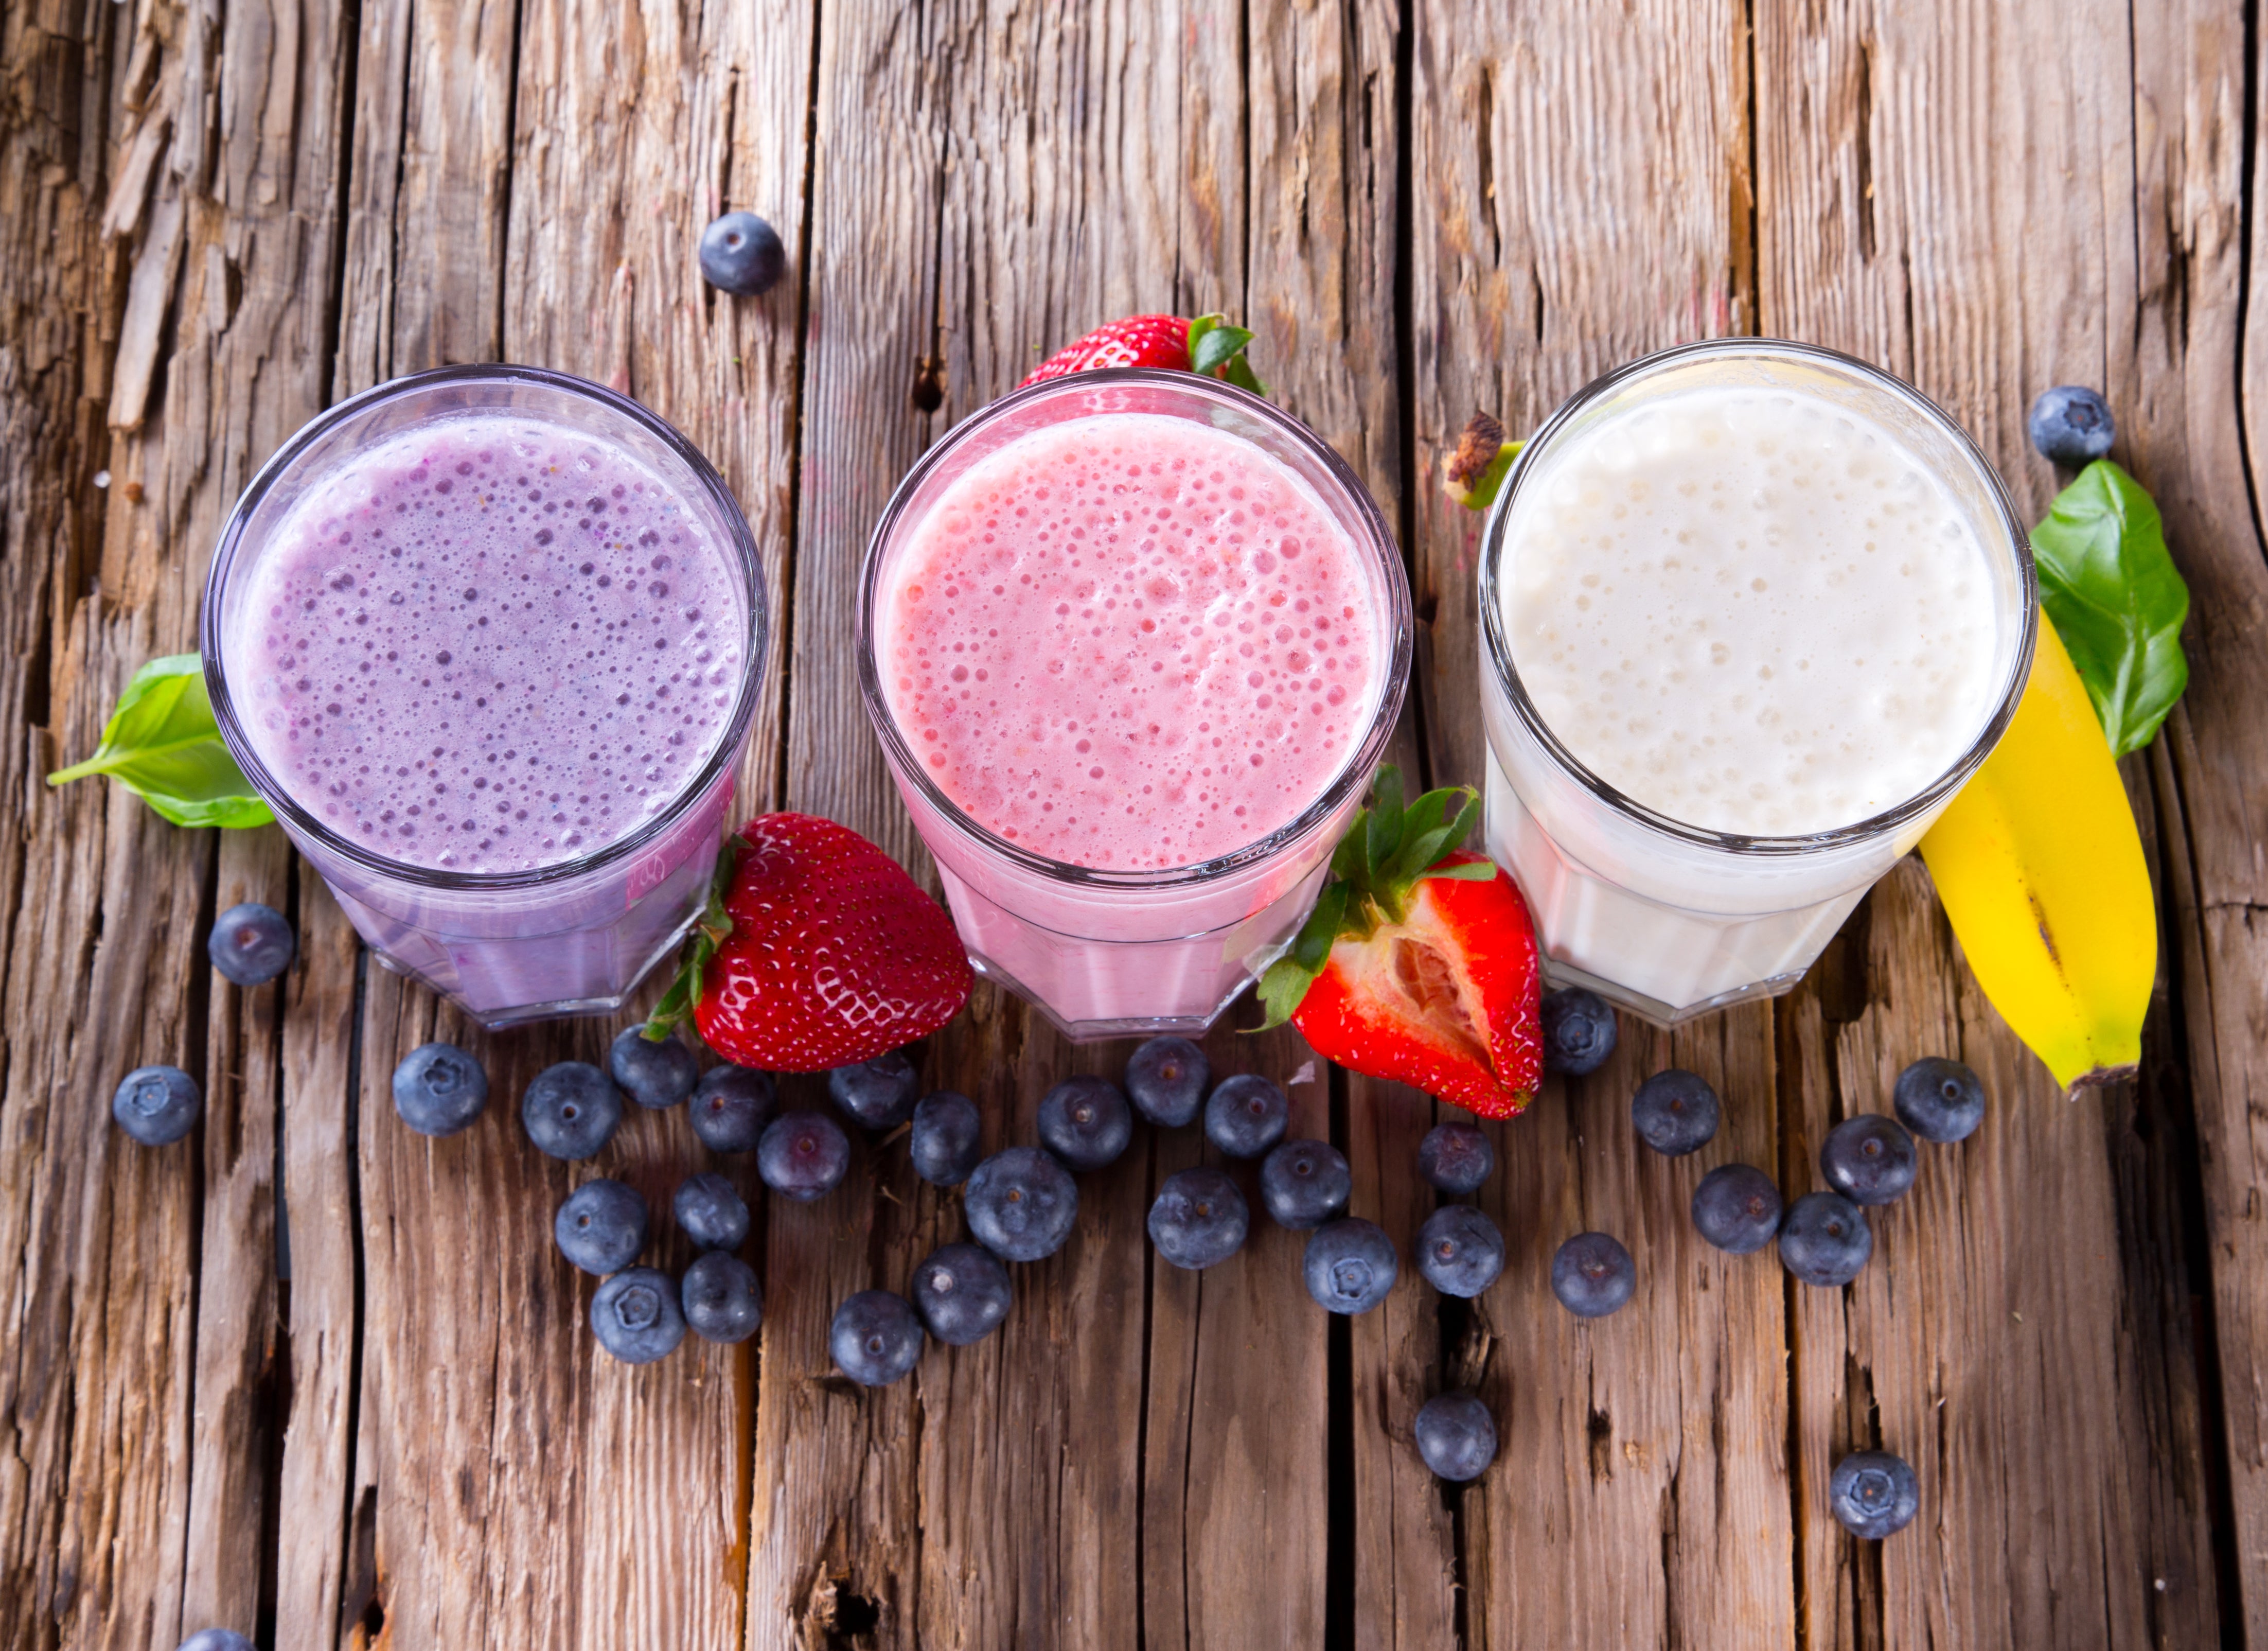 6 FAT-BUSTING SMOOTHIES FOR WEIGHT LOSS